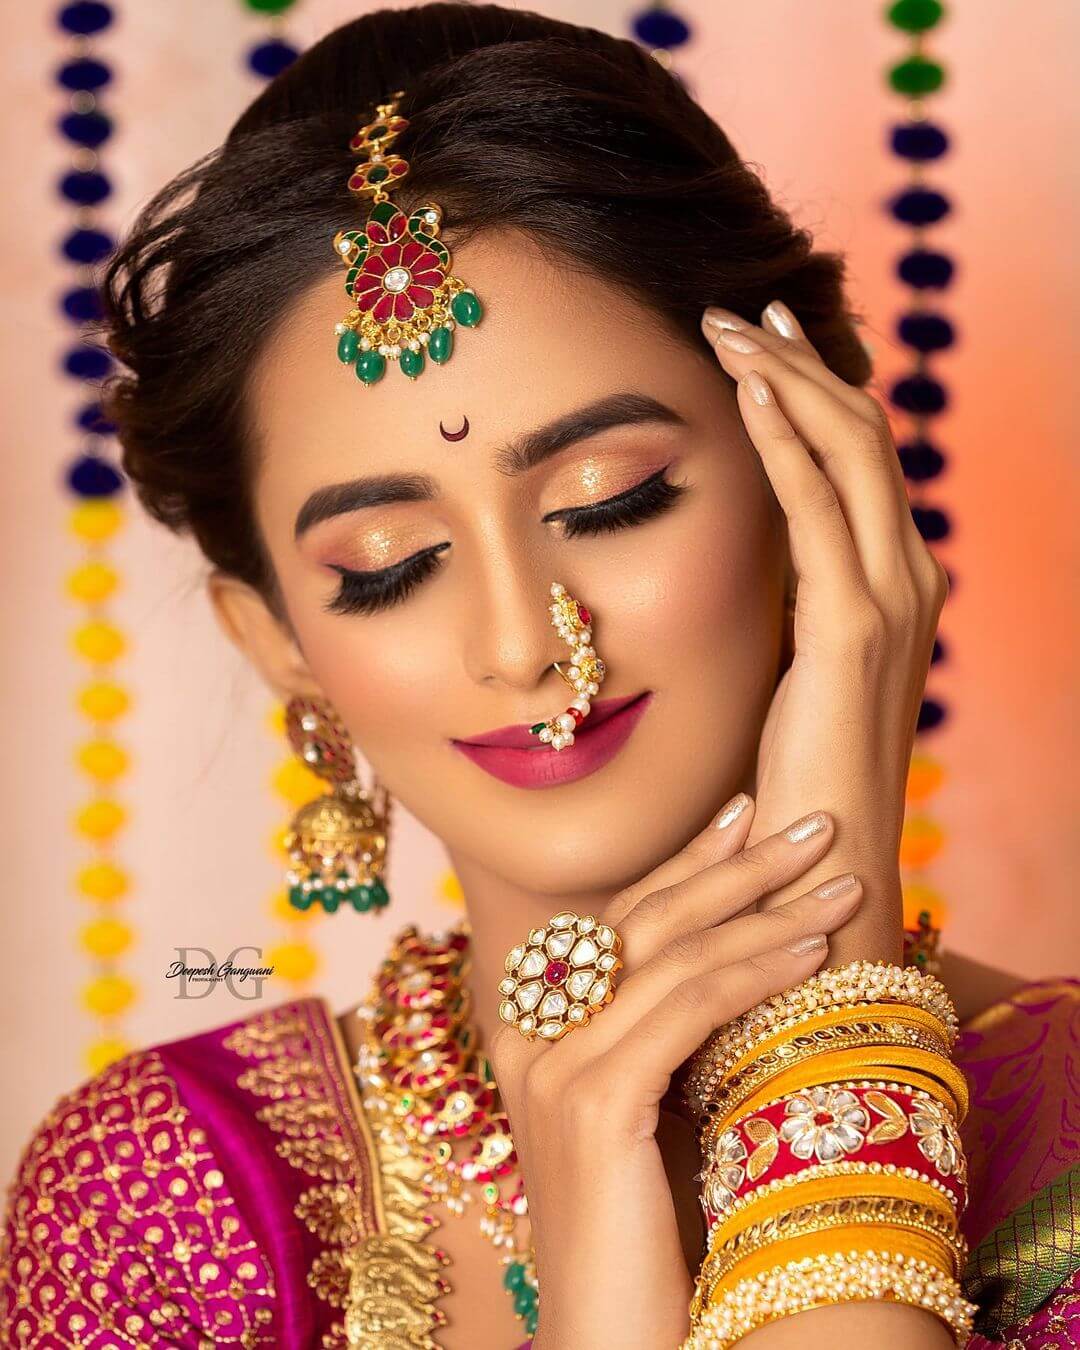 Pin These Bridal Makeup Ideas For Your Special day - K4 Fashion